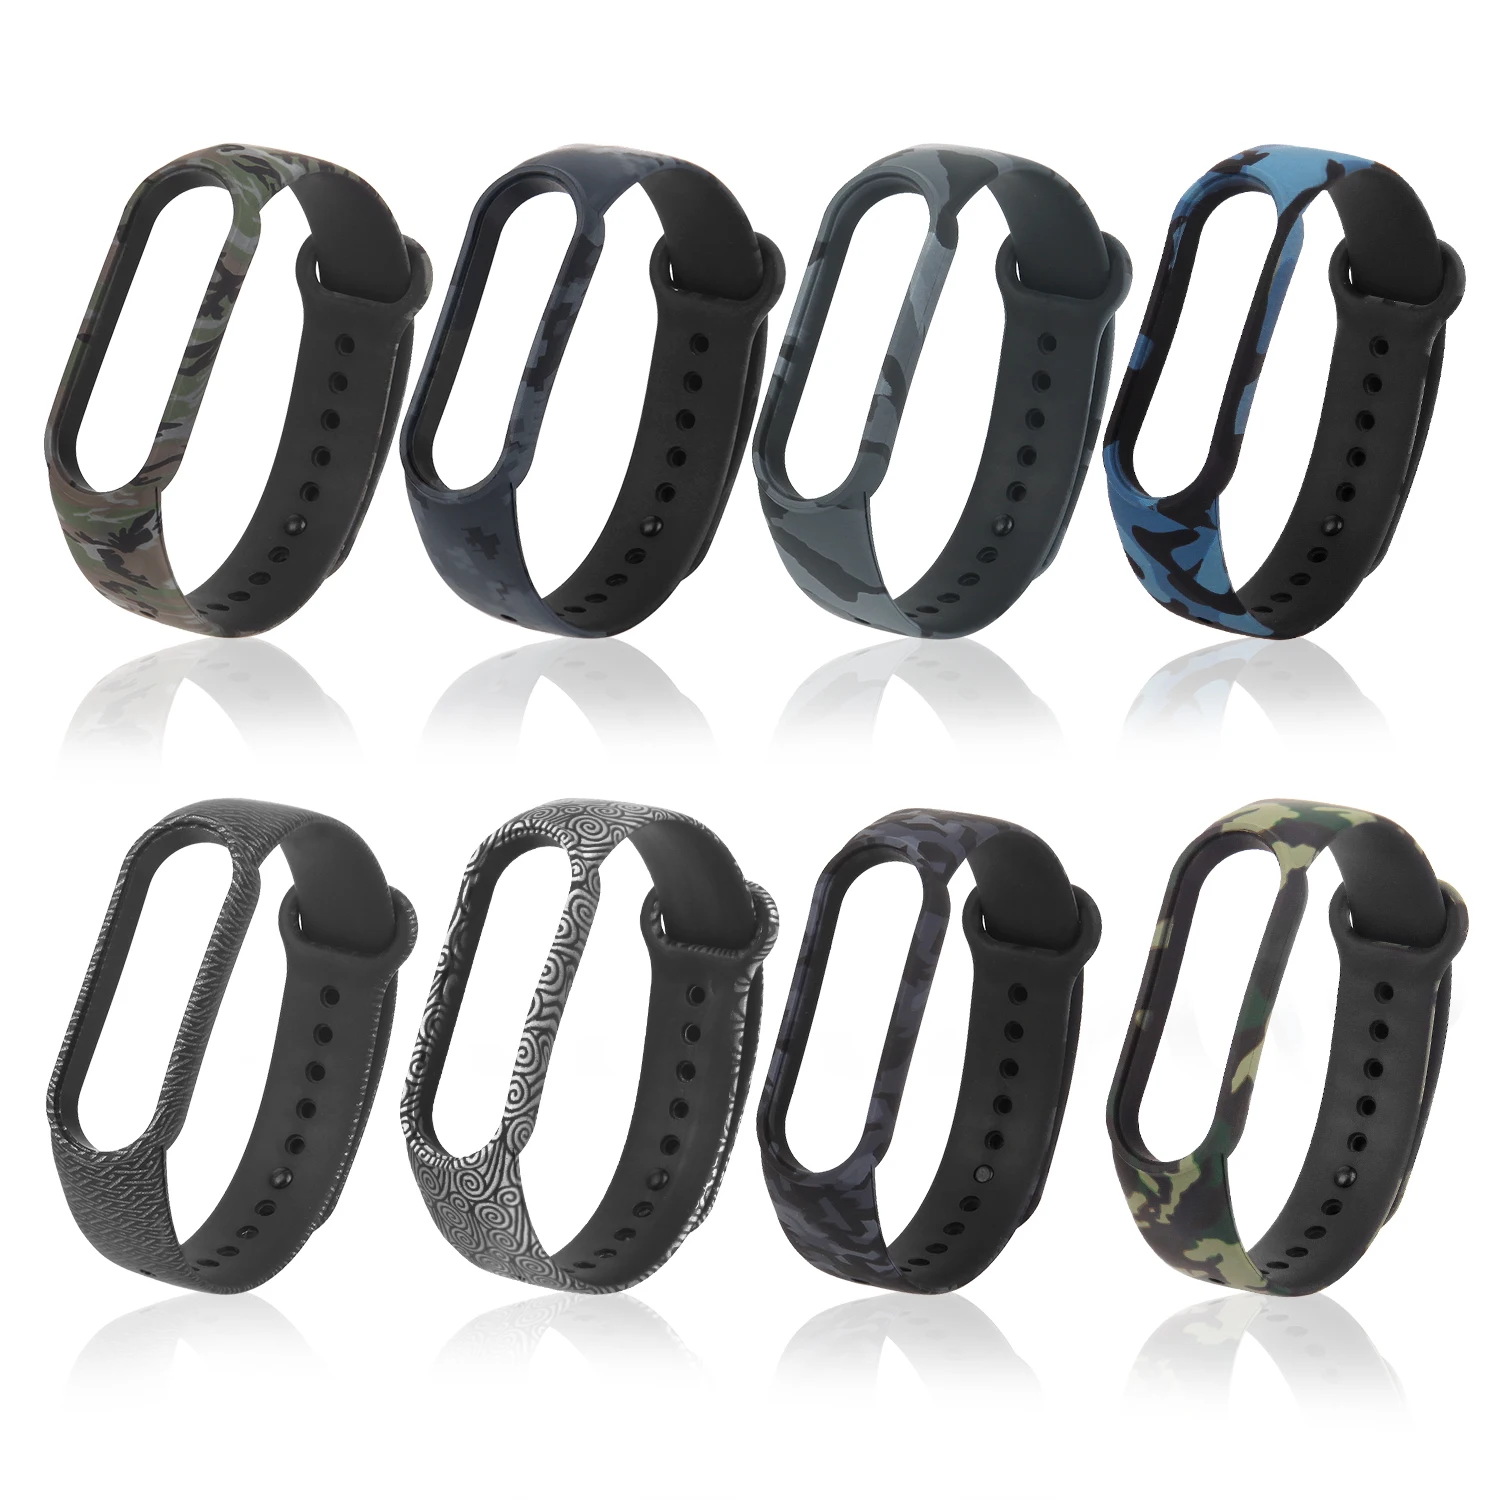 

Bracelet for Xiaomi Mi Band 5 Strap for Miband4 Miband 4 5 3 Correa Silicon for Mi Band 5 NFC Strap Accessories Replacement Belt